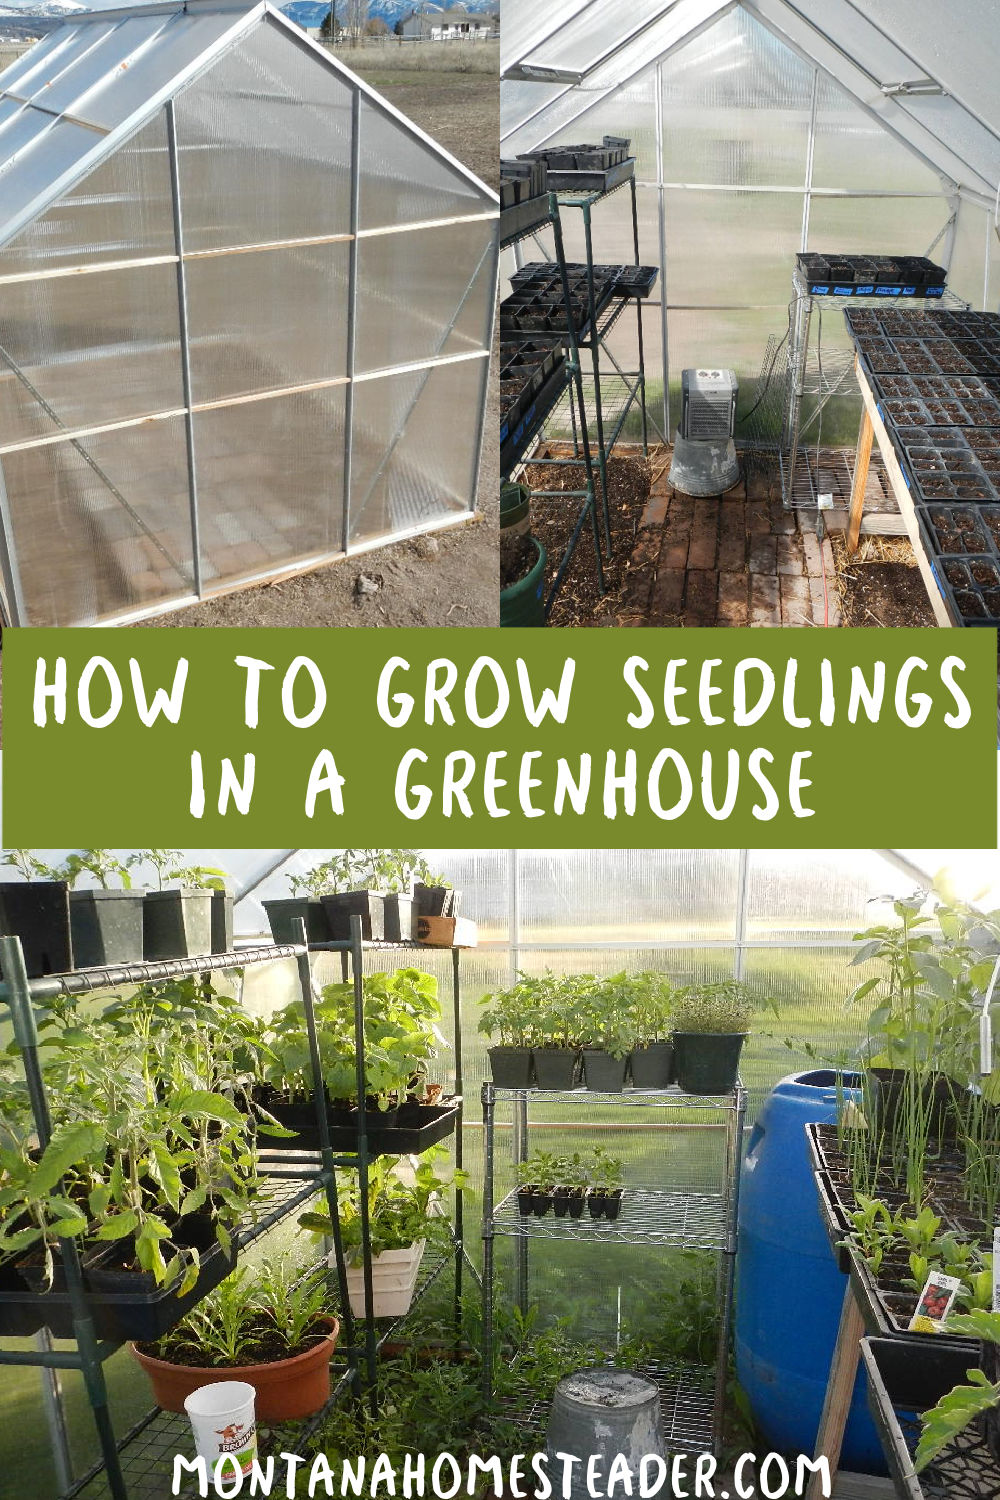 Learn how to grow seedlings in a greenhouse how to heat install shelves water seeds and seedlings